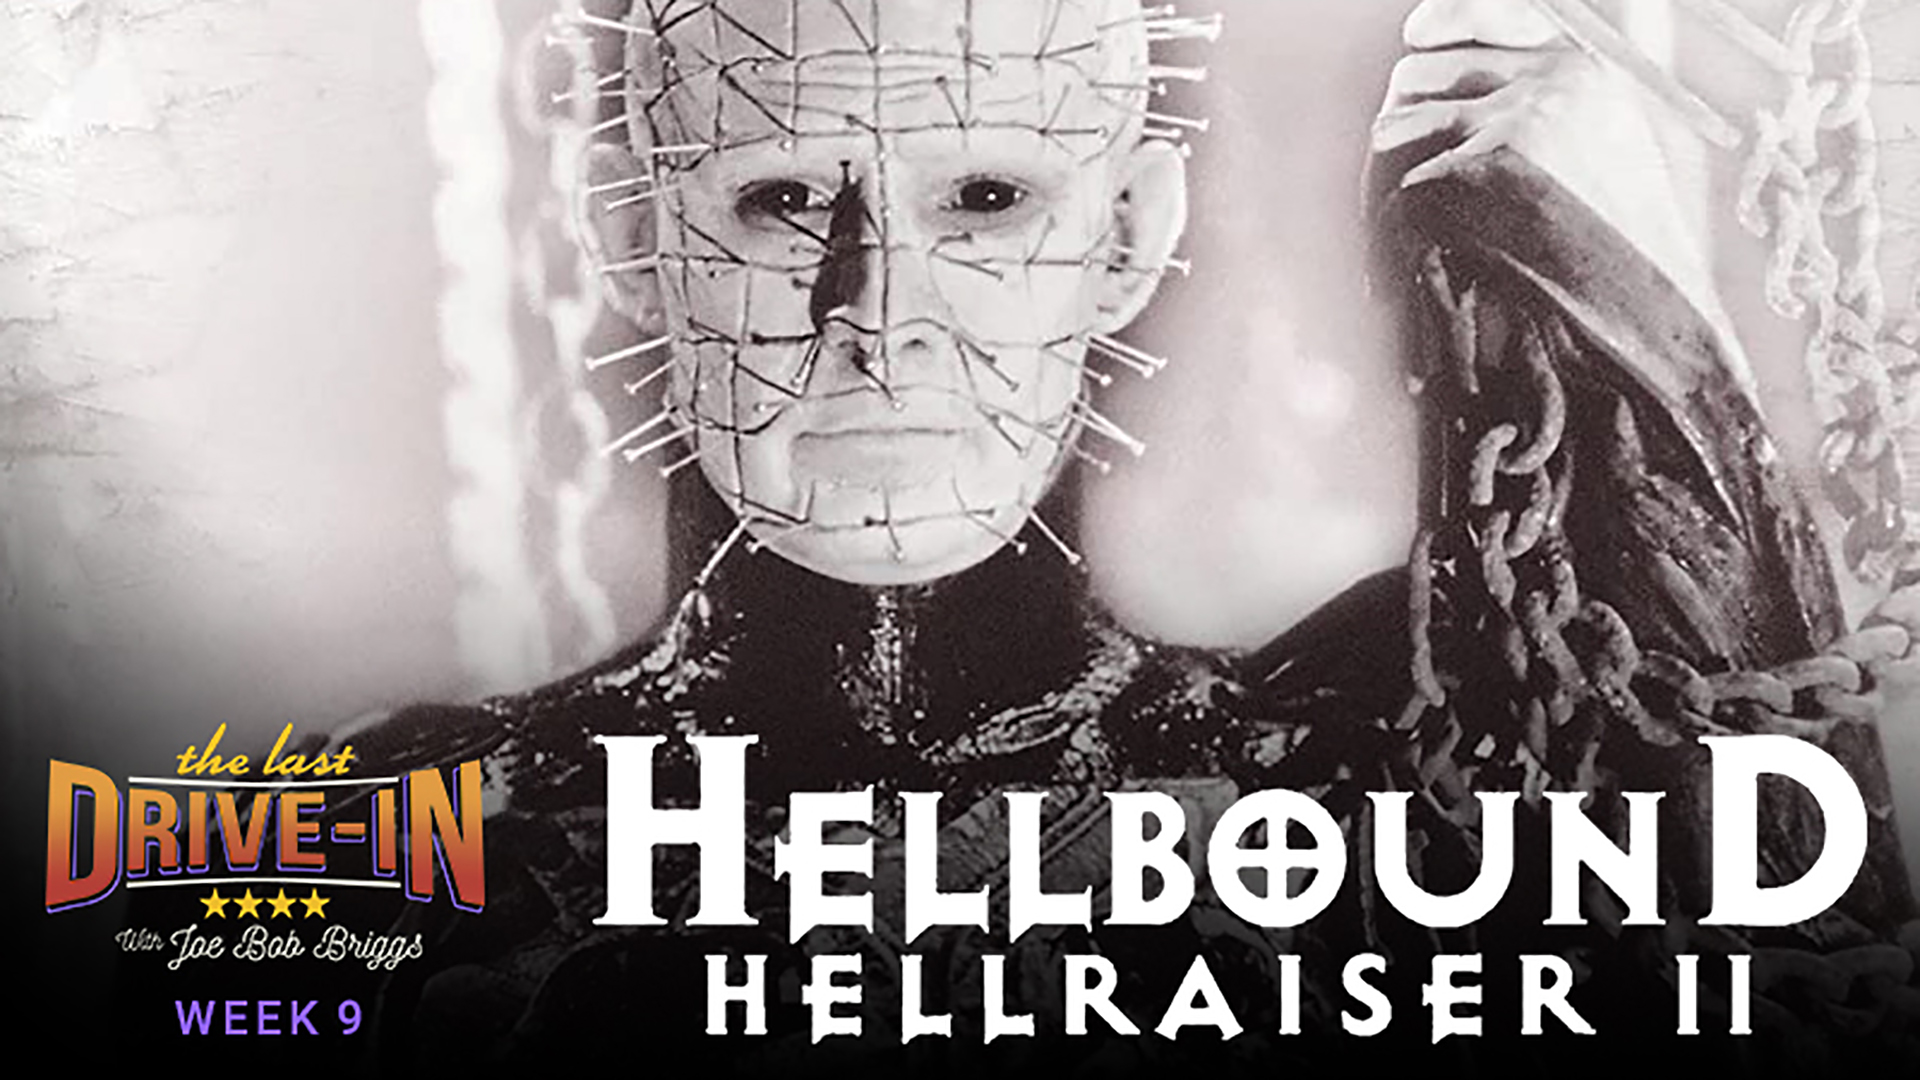 Week 9: Hellbound Hellraiser II, In the sequel to HELLRAISER, an occult-obsessed doctor calls forth the Cenobites., TV-MA, Season 1028422, Episode 17